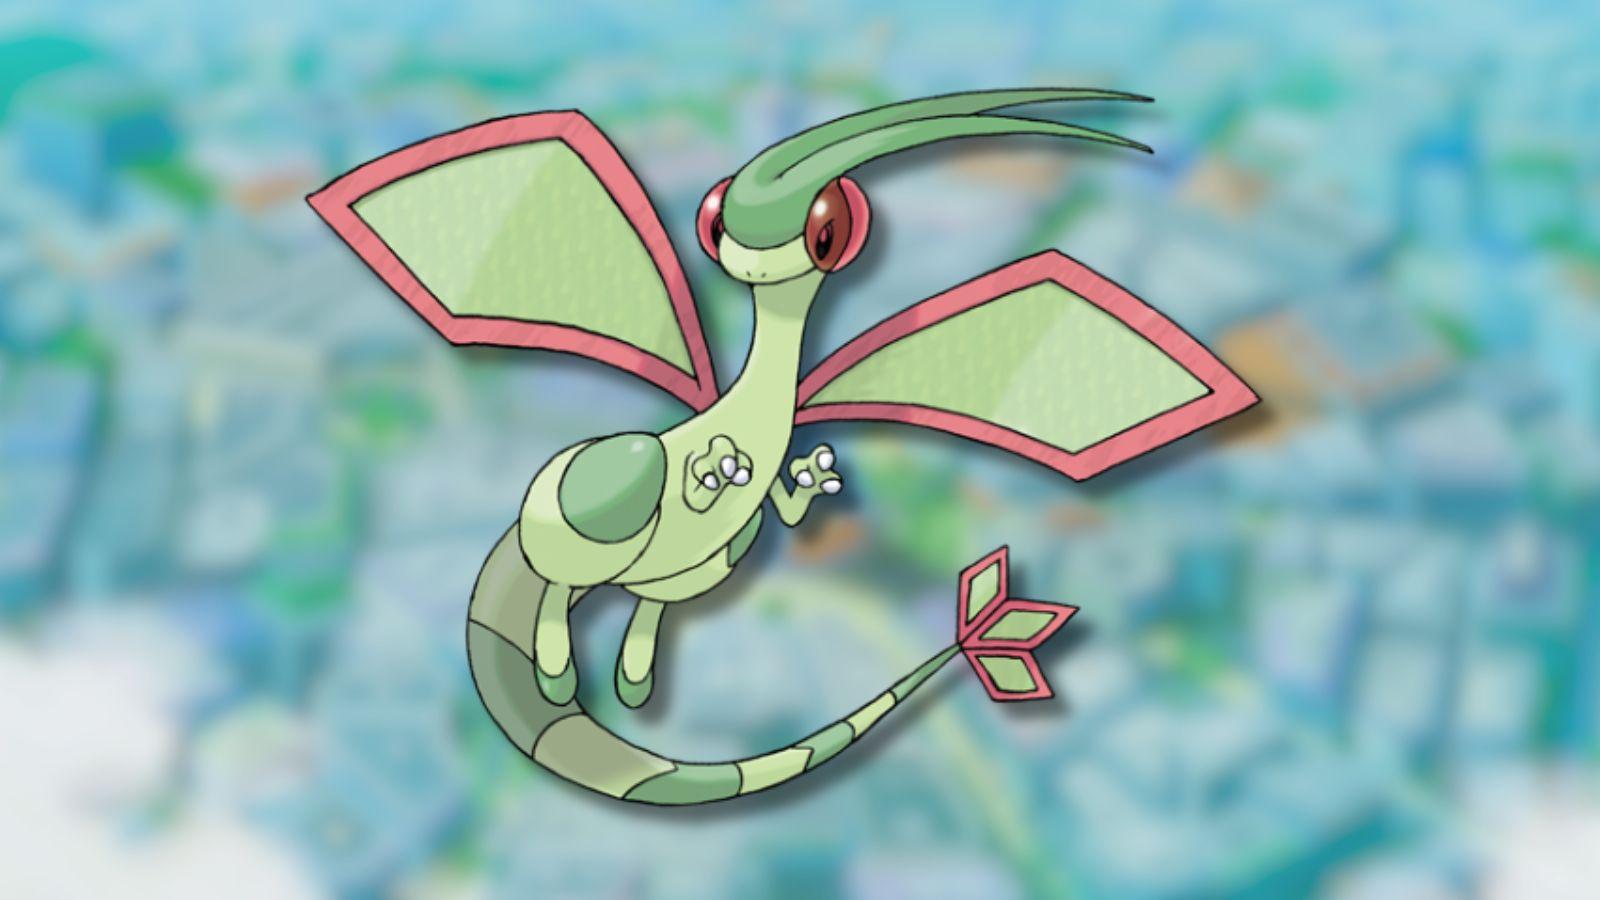 Flygon Pokemon with Lumiose City background.a